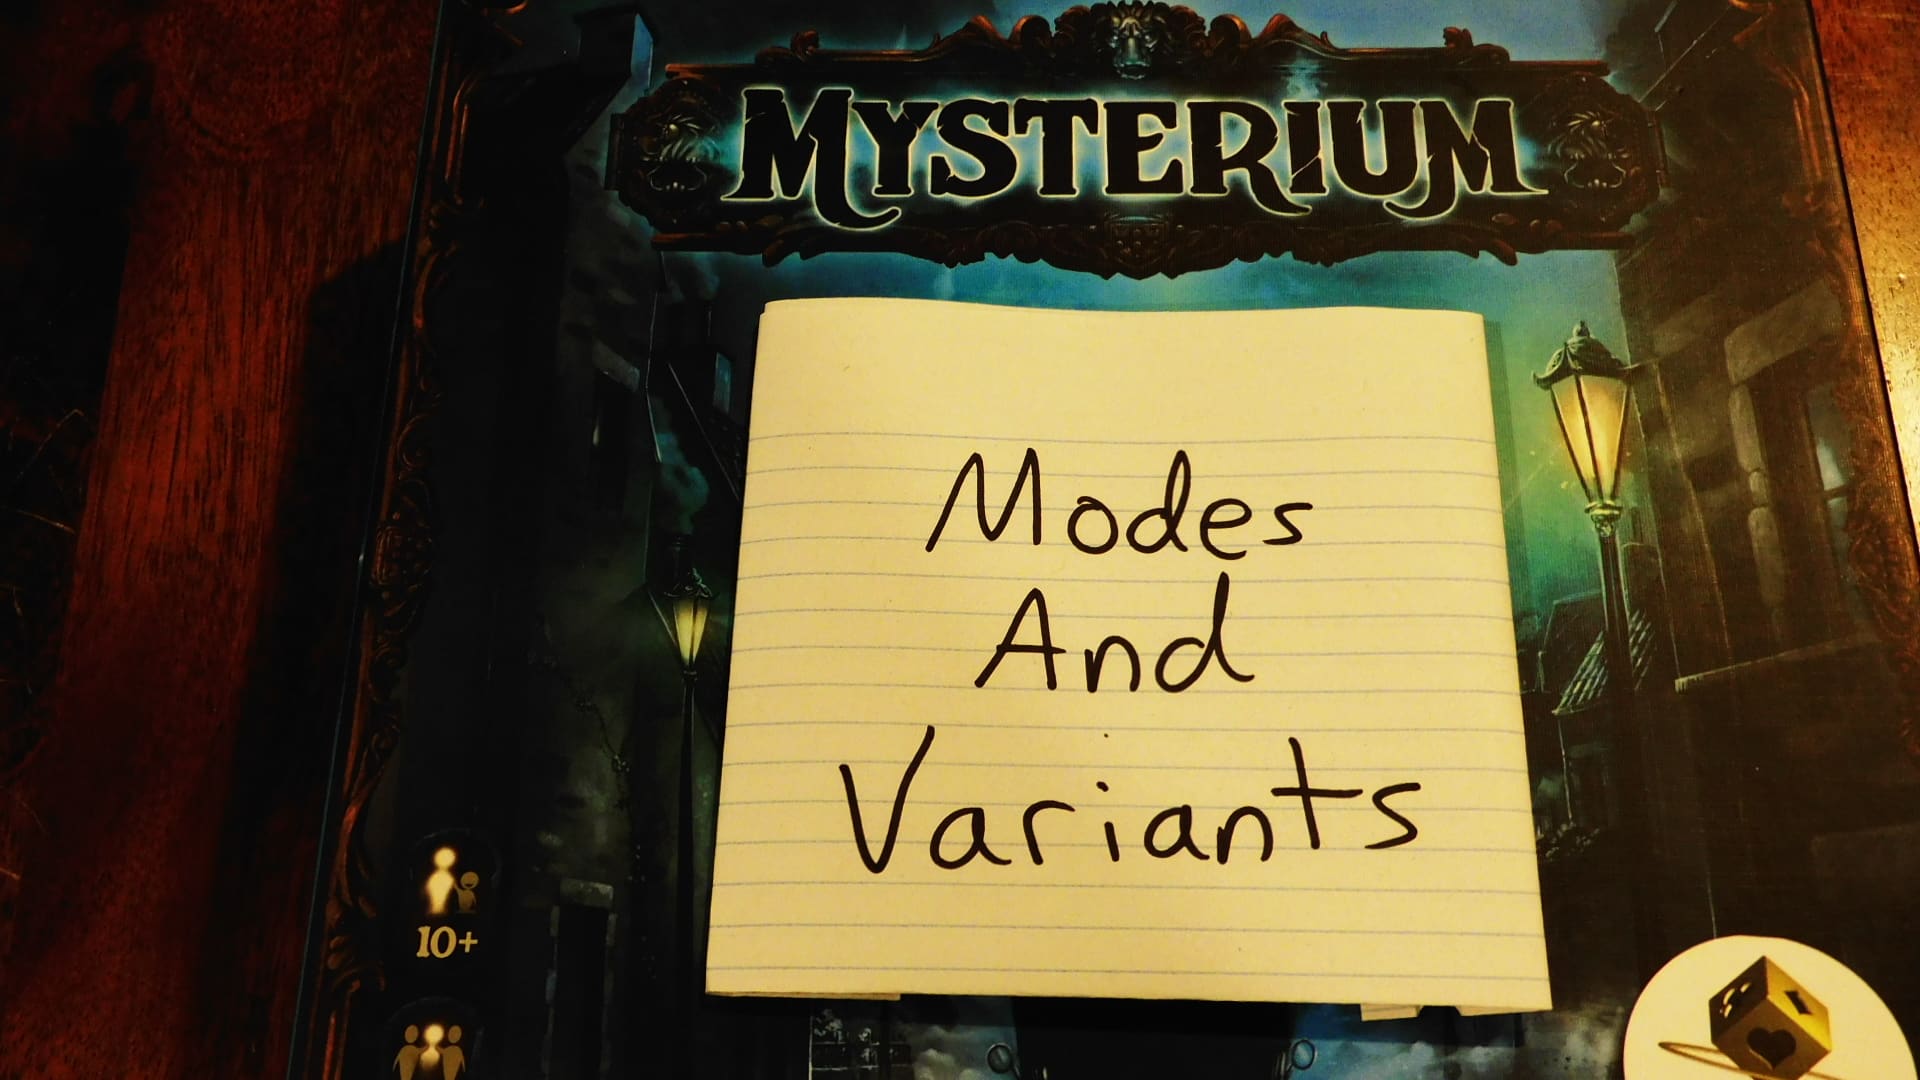 A Detailed Look At The Modes And Variants For Mysterium